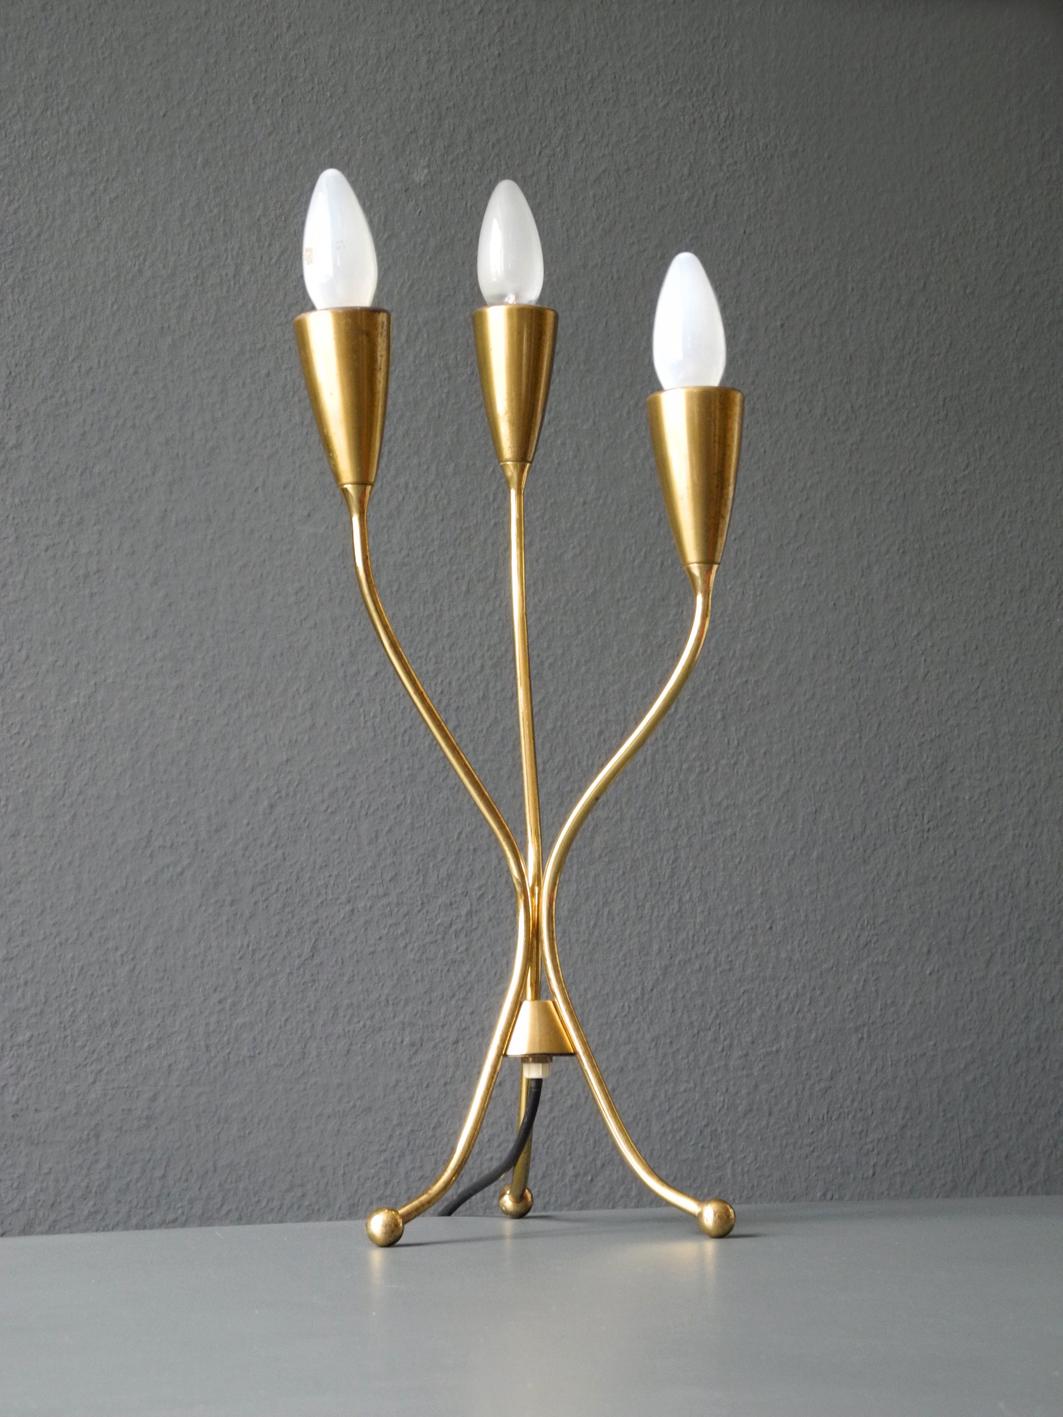 Large Italian Mid-Century Modernist Brass Tripod Cone Table Lamp with Three Arms 2